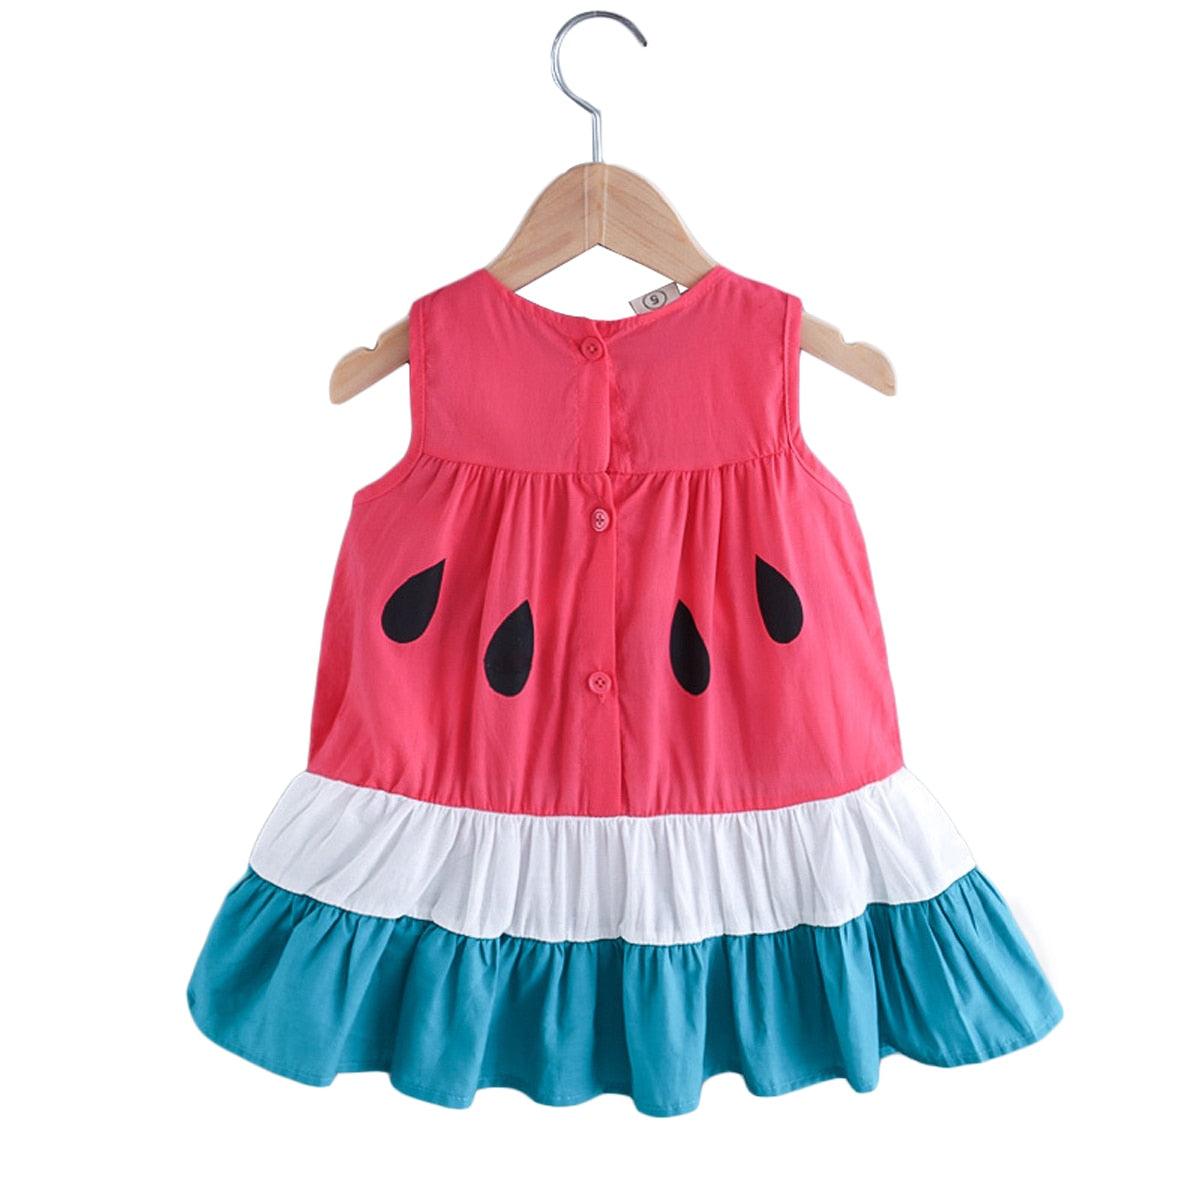 Watermelon Printed Ruffle Dress - Shop Baby Boutiques 